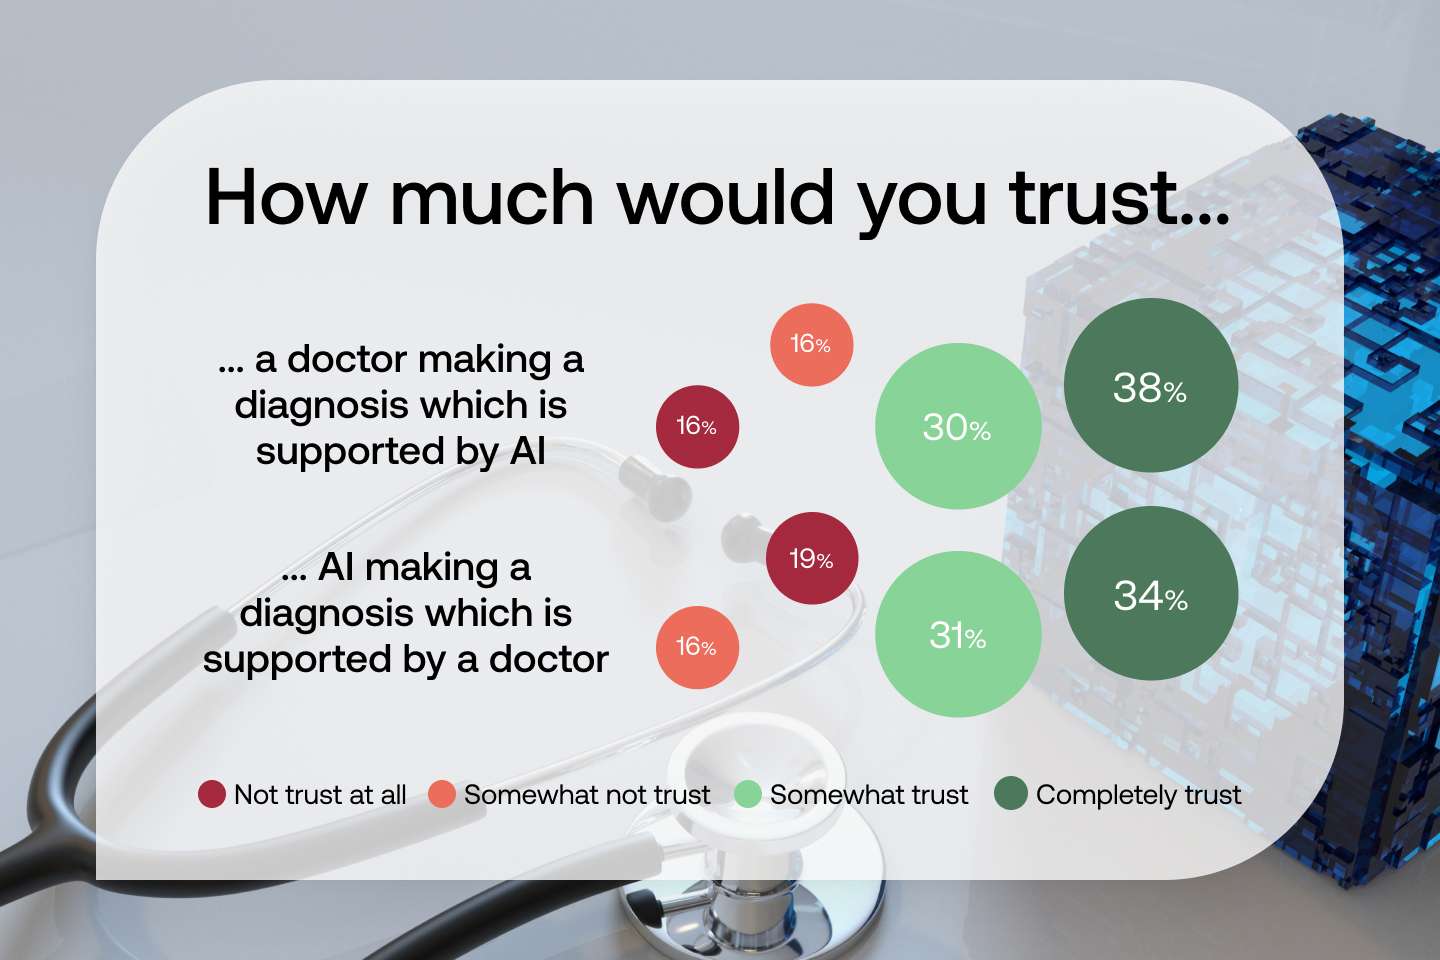 Americans' levels of trust in AI, US respondents seem to trust more a diagnosis made by a doctor supported by an AI, rather than a diagnosis made by an AI supported by a doctor.